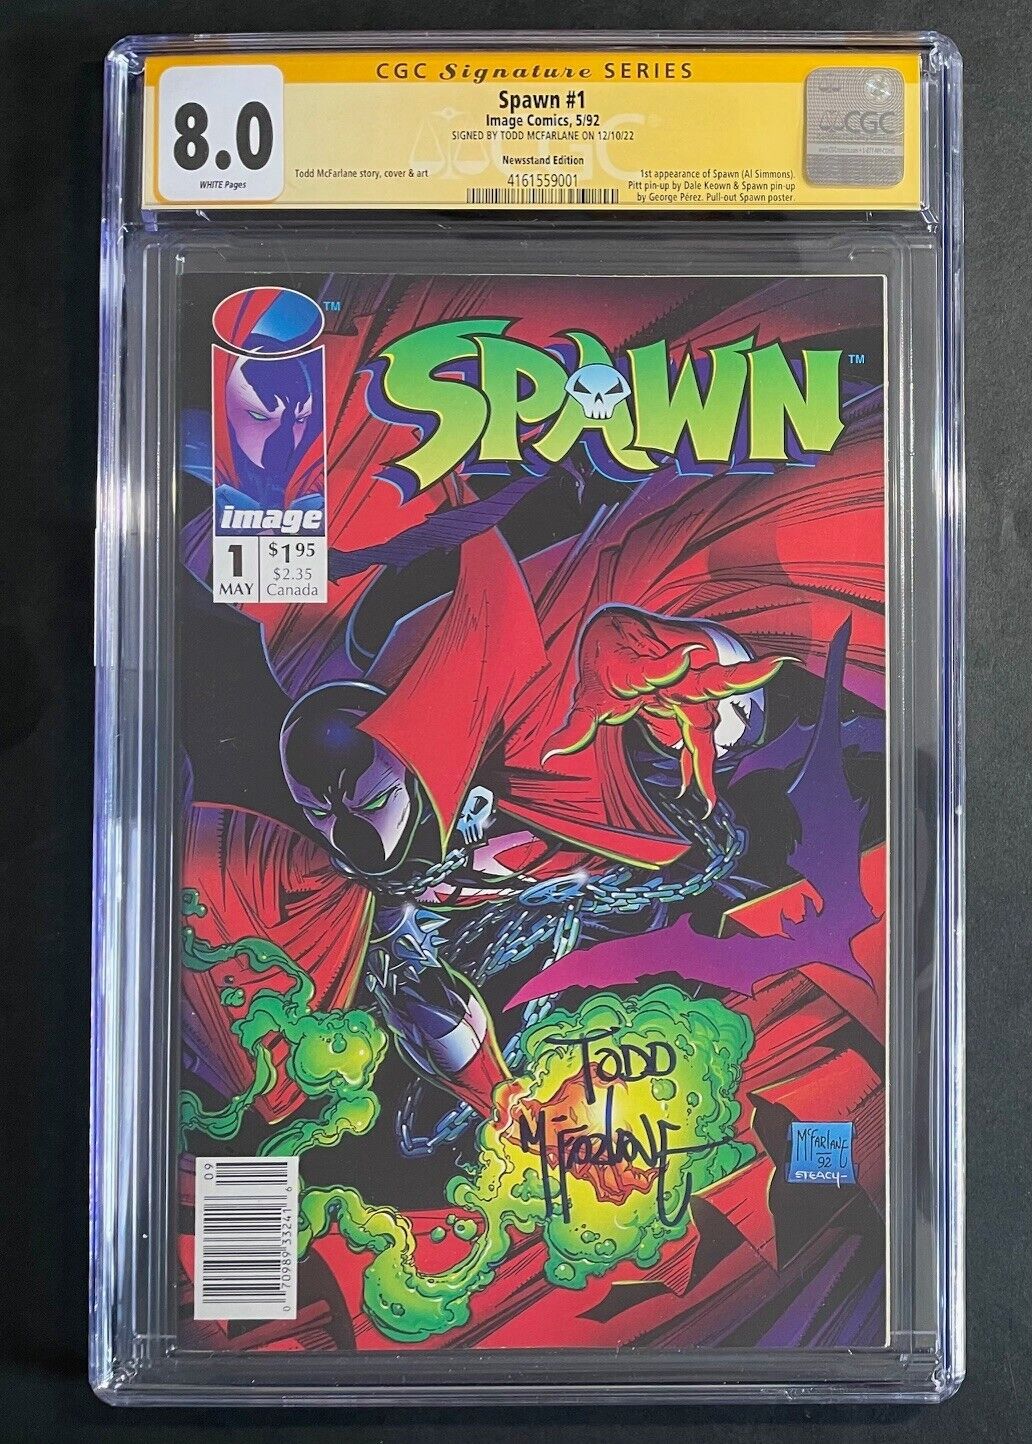 Spawn #1 CGC 8.0 SS Signed by Todd McFarlane Image 1992 Comics Newsstand